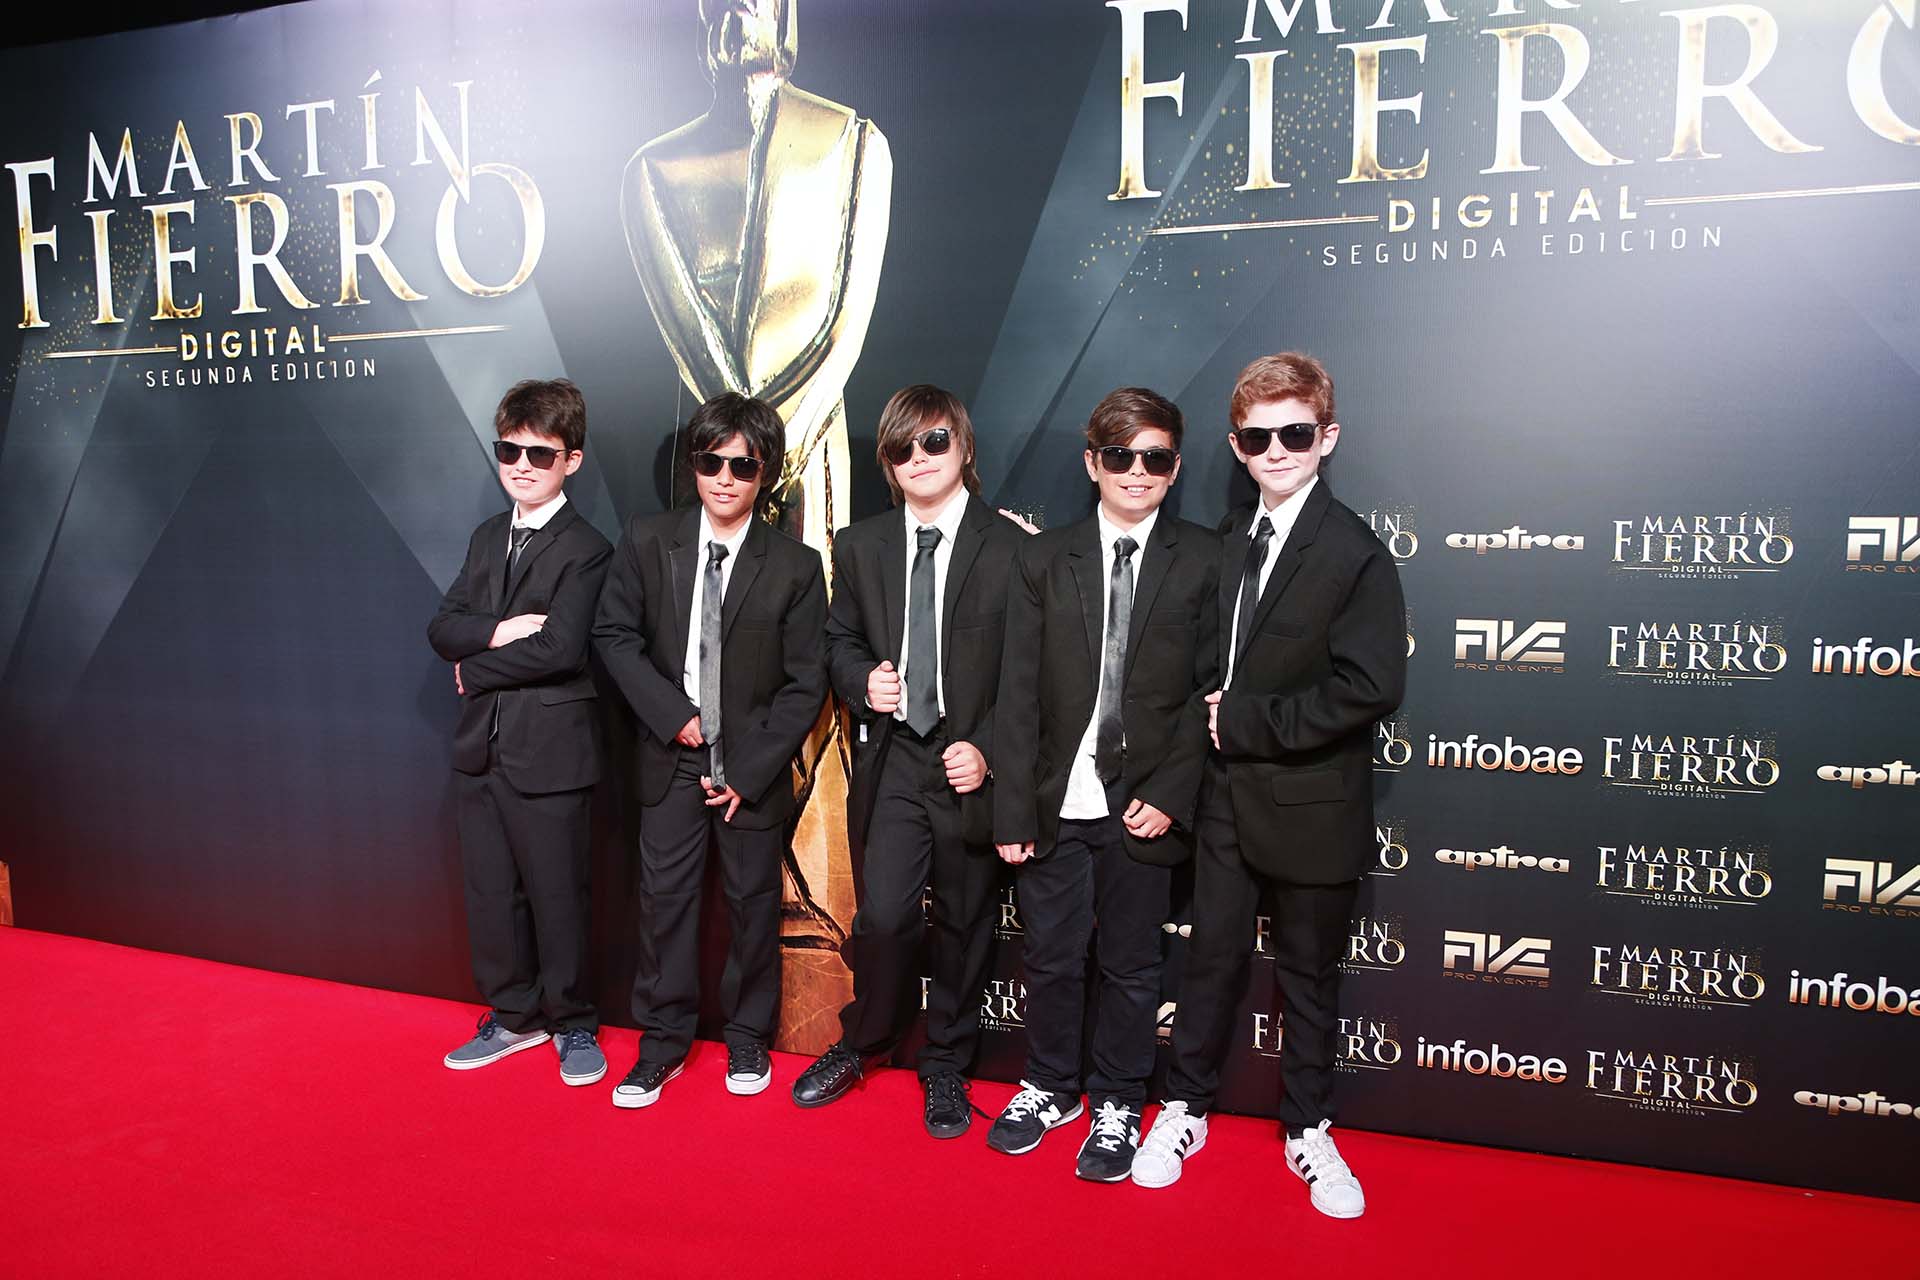 The Centennials, the little influencers in a recent installment of the Martín Fierro Digital, all wore black tuxedos with gray ties and sporty detail on canvas sneakers